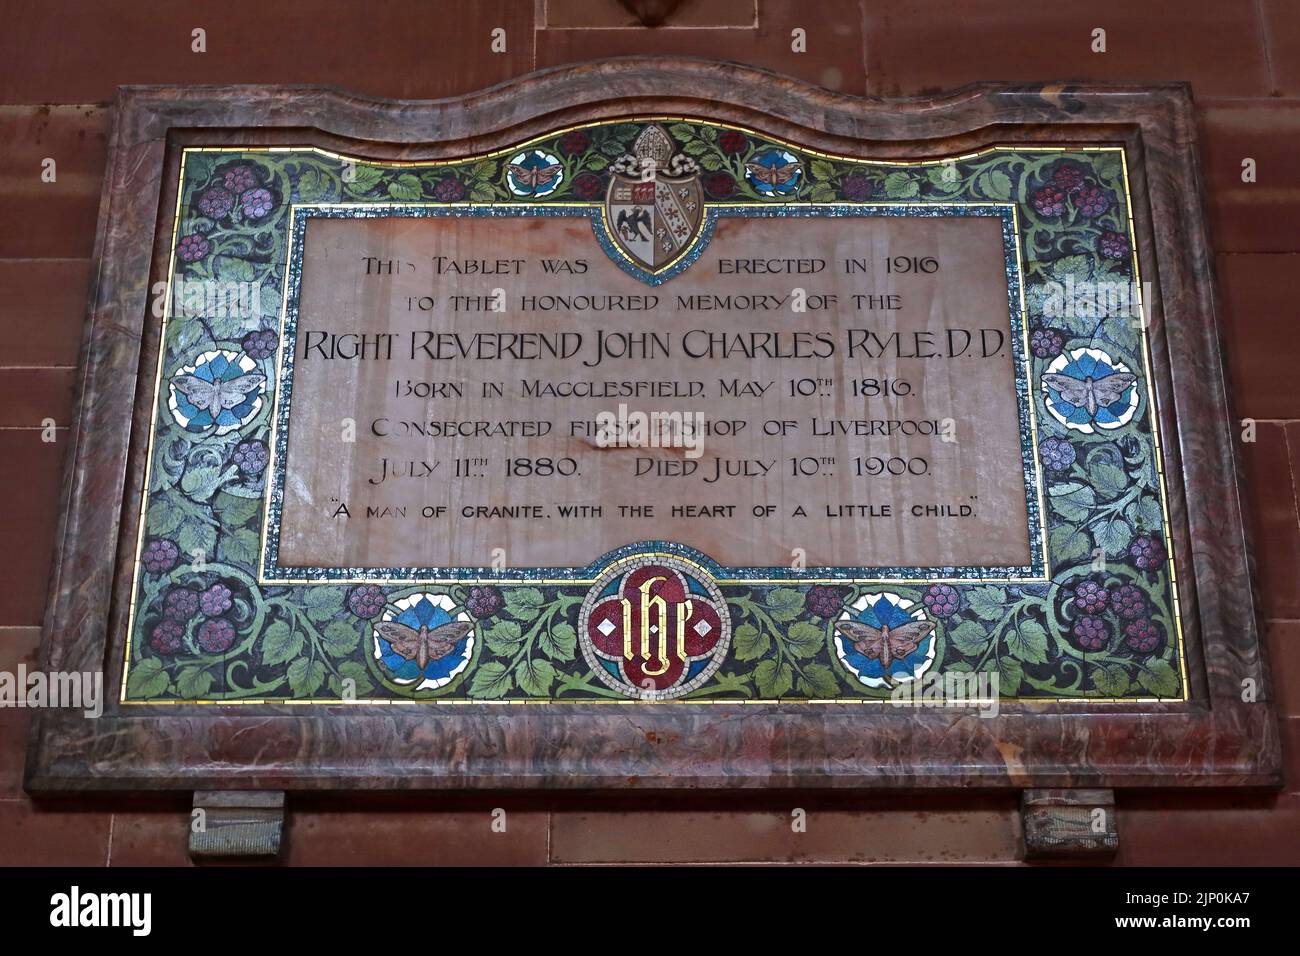 Tablet memorial to the right reverend John Charles Ryle, DD, 1st bishop of Liverpool, who was born in Macclesfield,  SK10 1DY Stock Photo